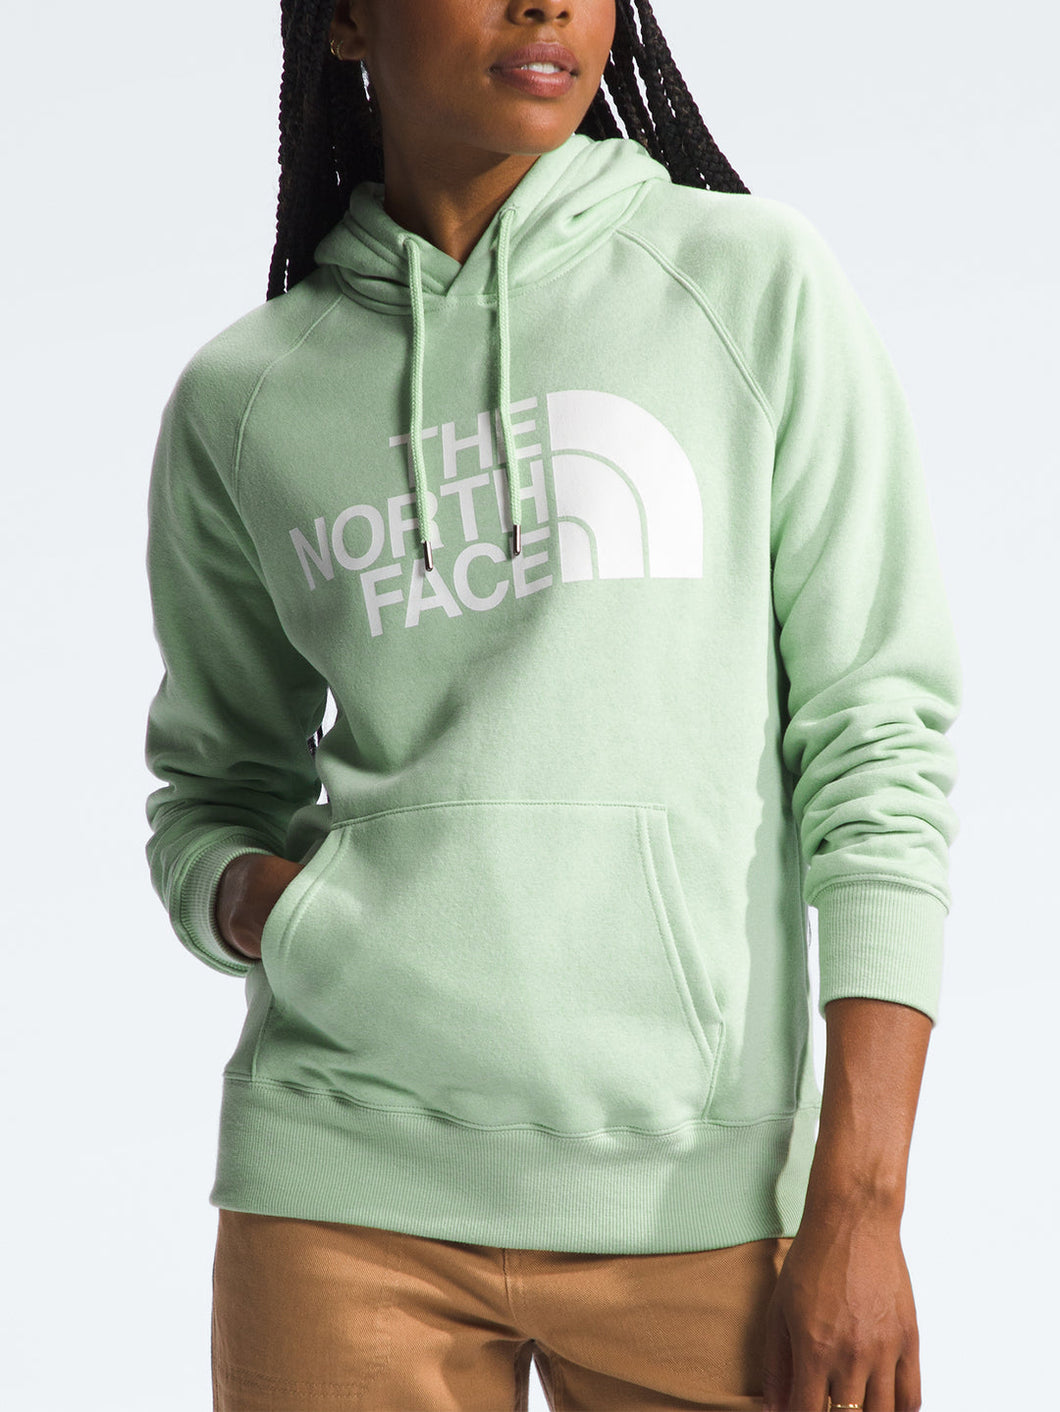 The North Face W's Half Dome Pullover Hoodie